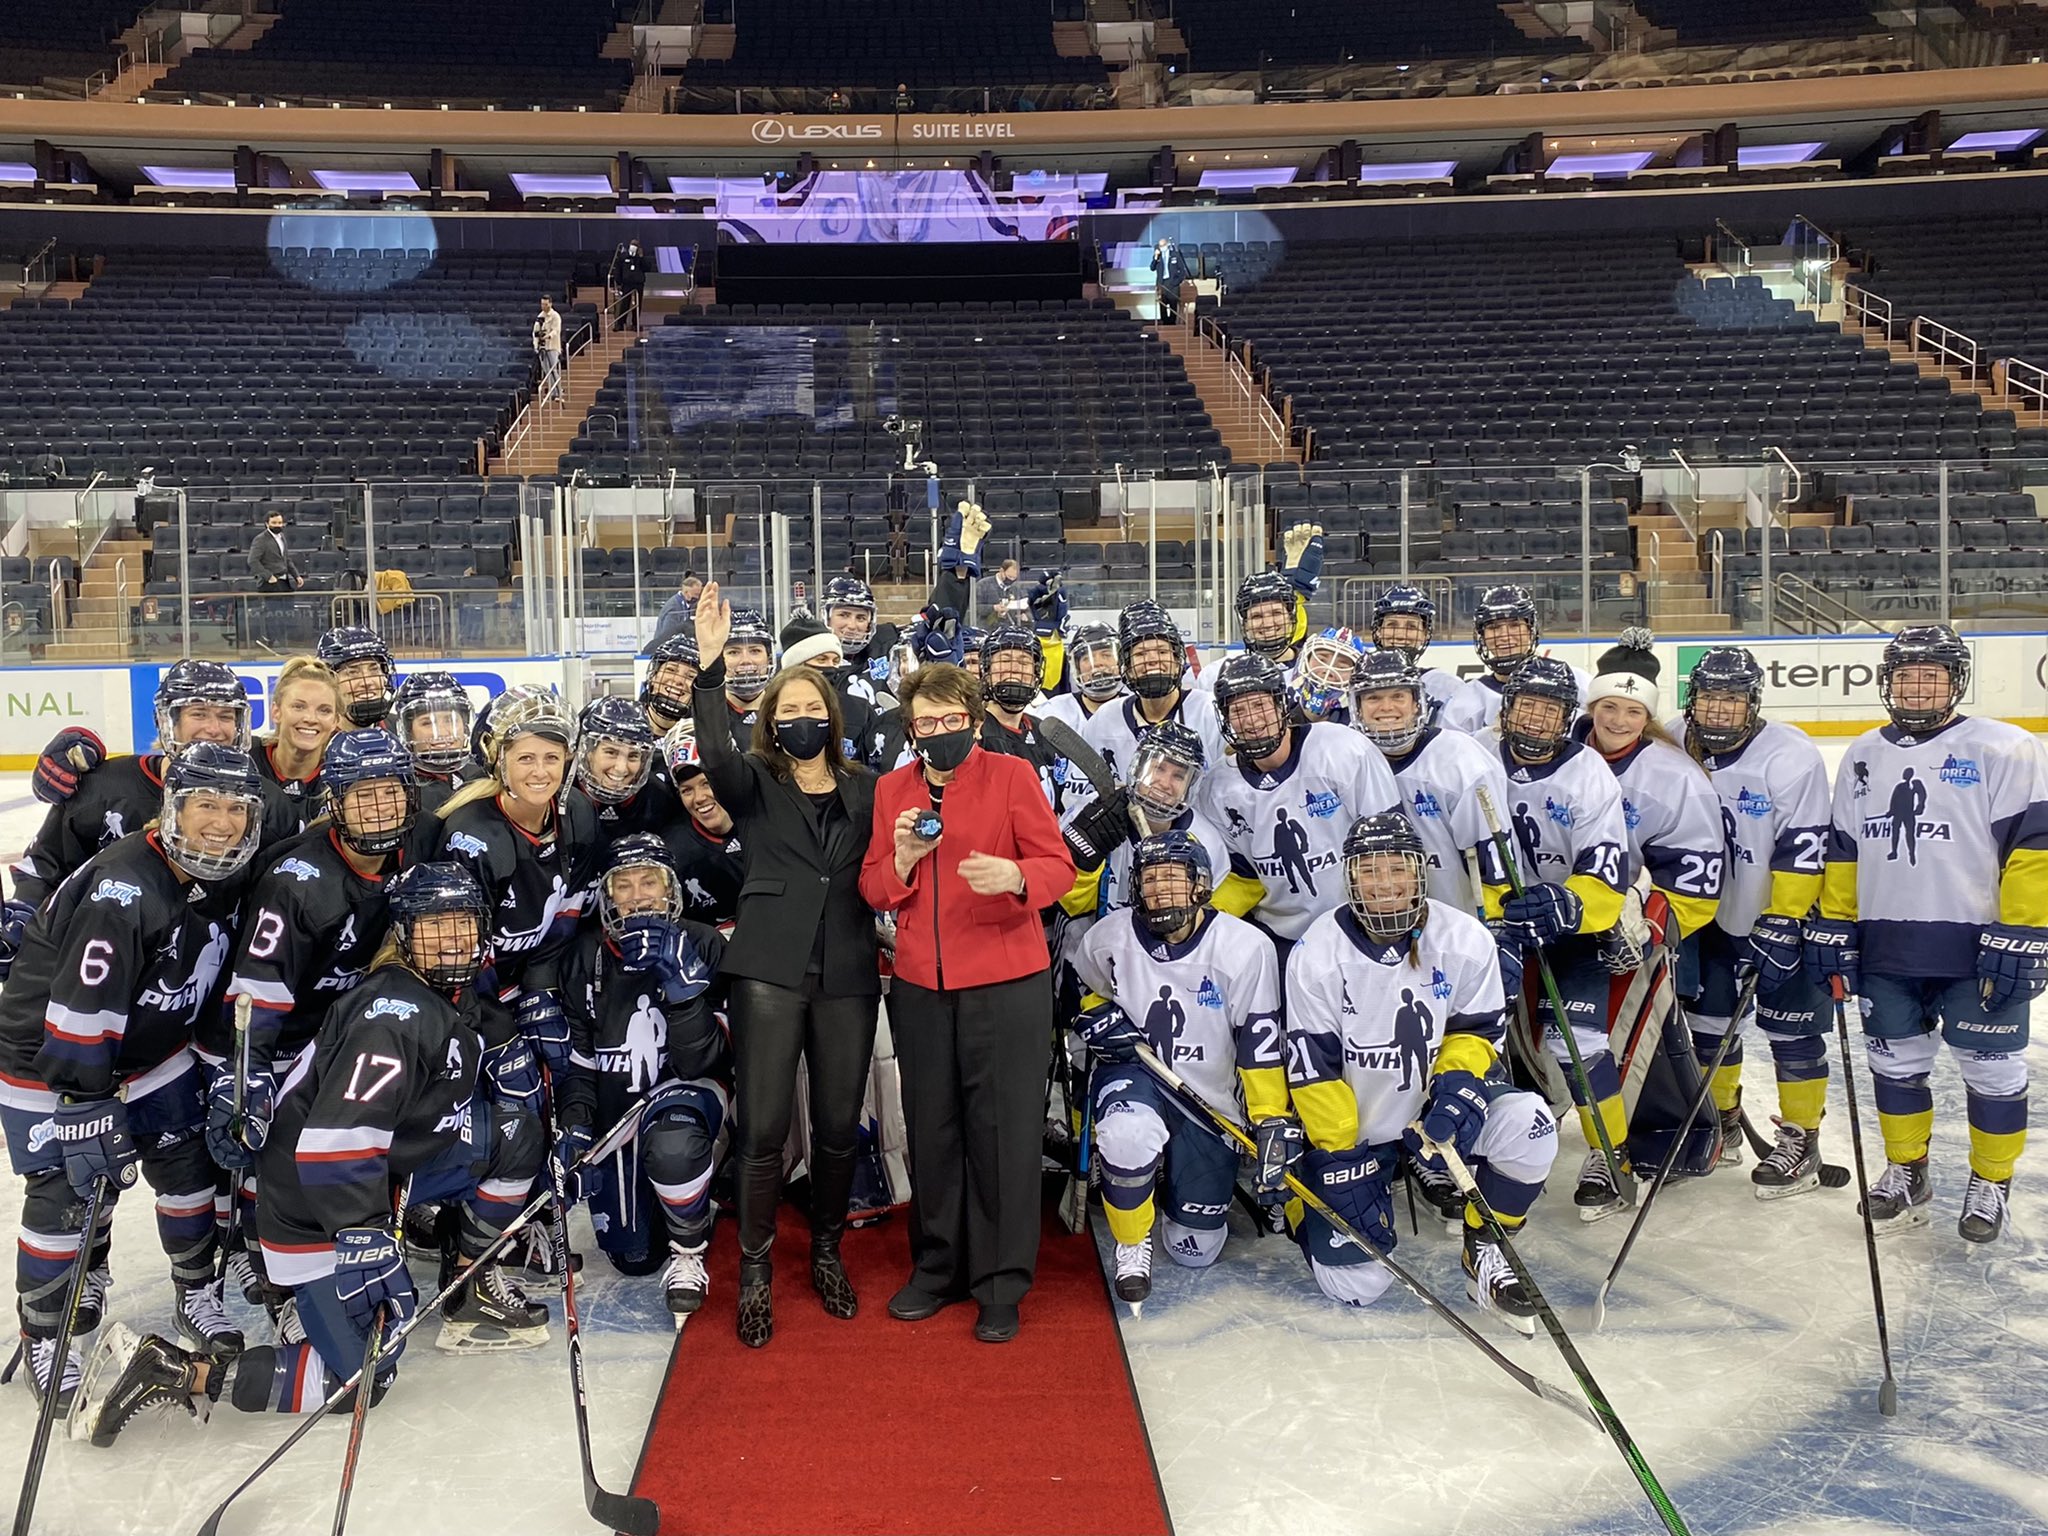 PWHPA women's hockey game to make history at Madison Square Garden